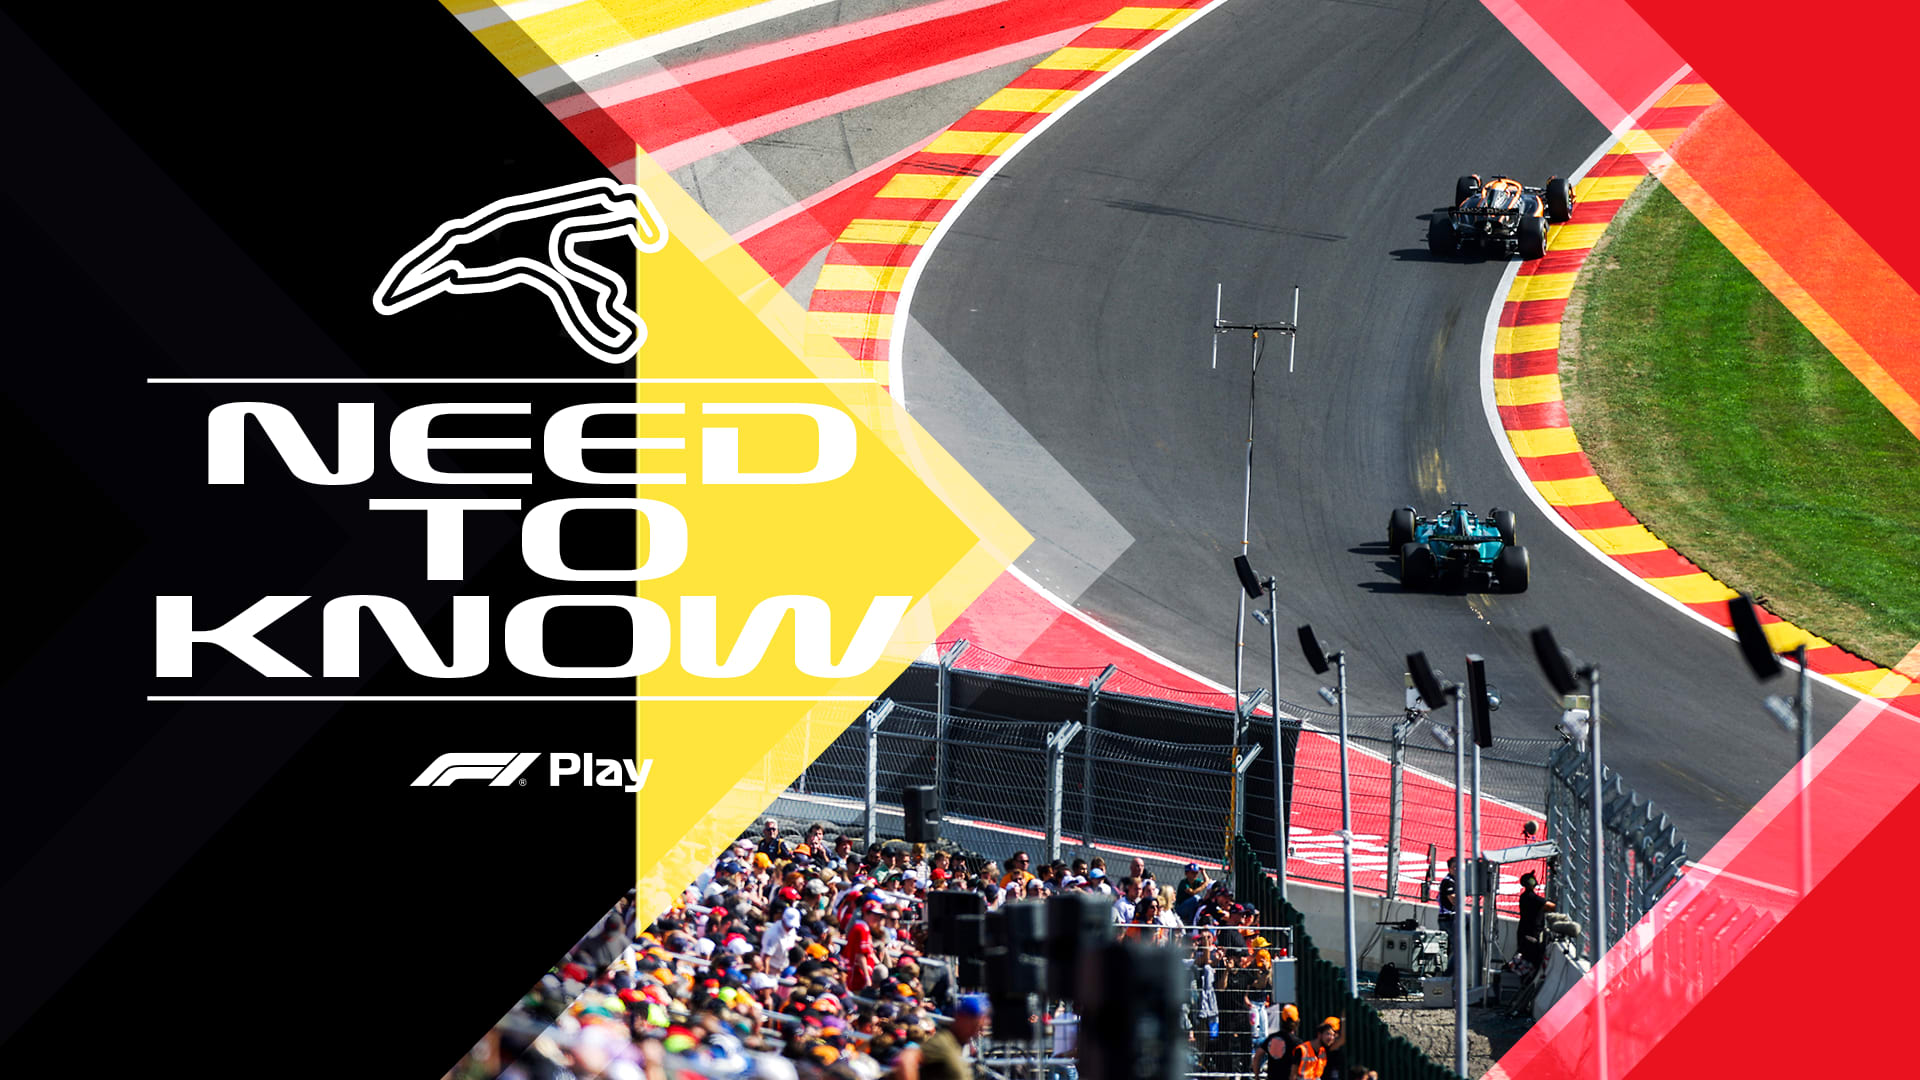 NEED TO KNOW The most important facts, stats and trivia ahead of the 2023 Belgian Grand Prix Formula 1®